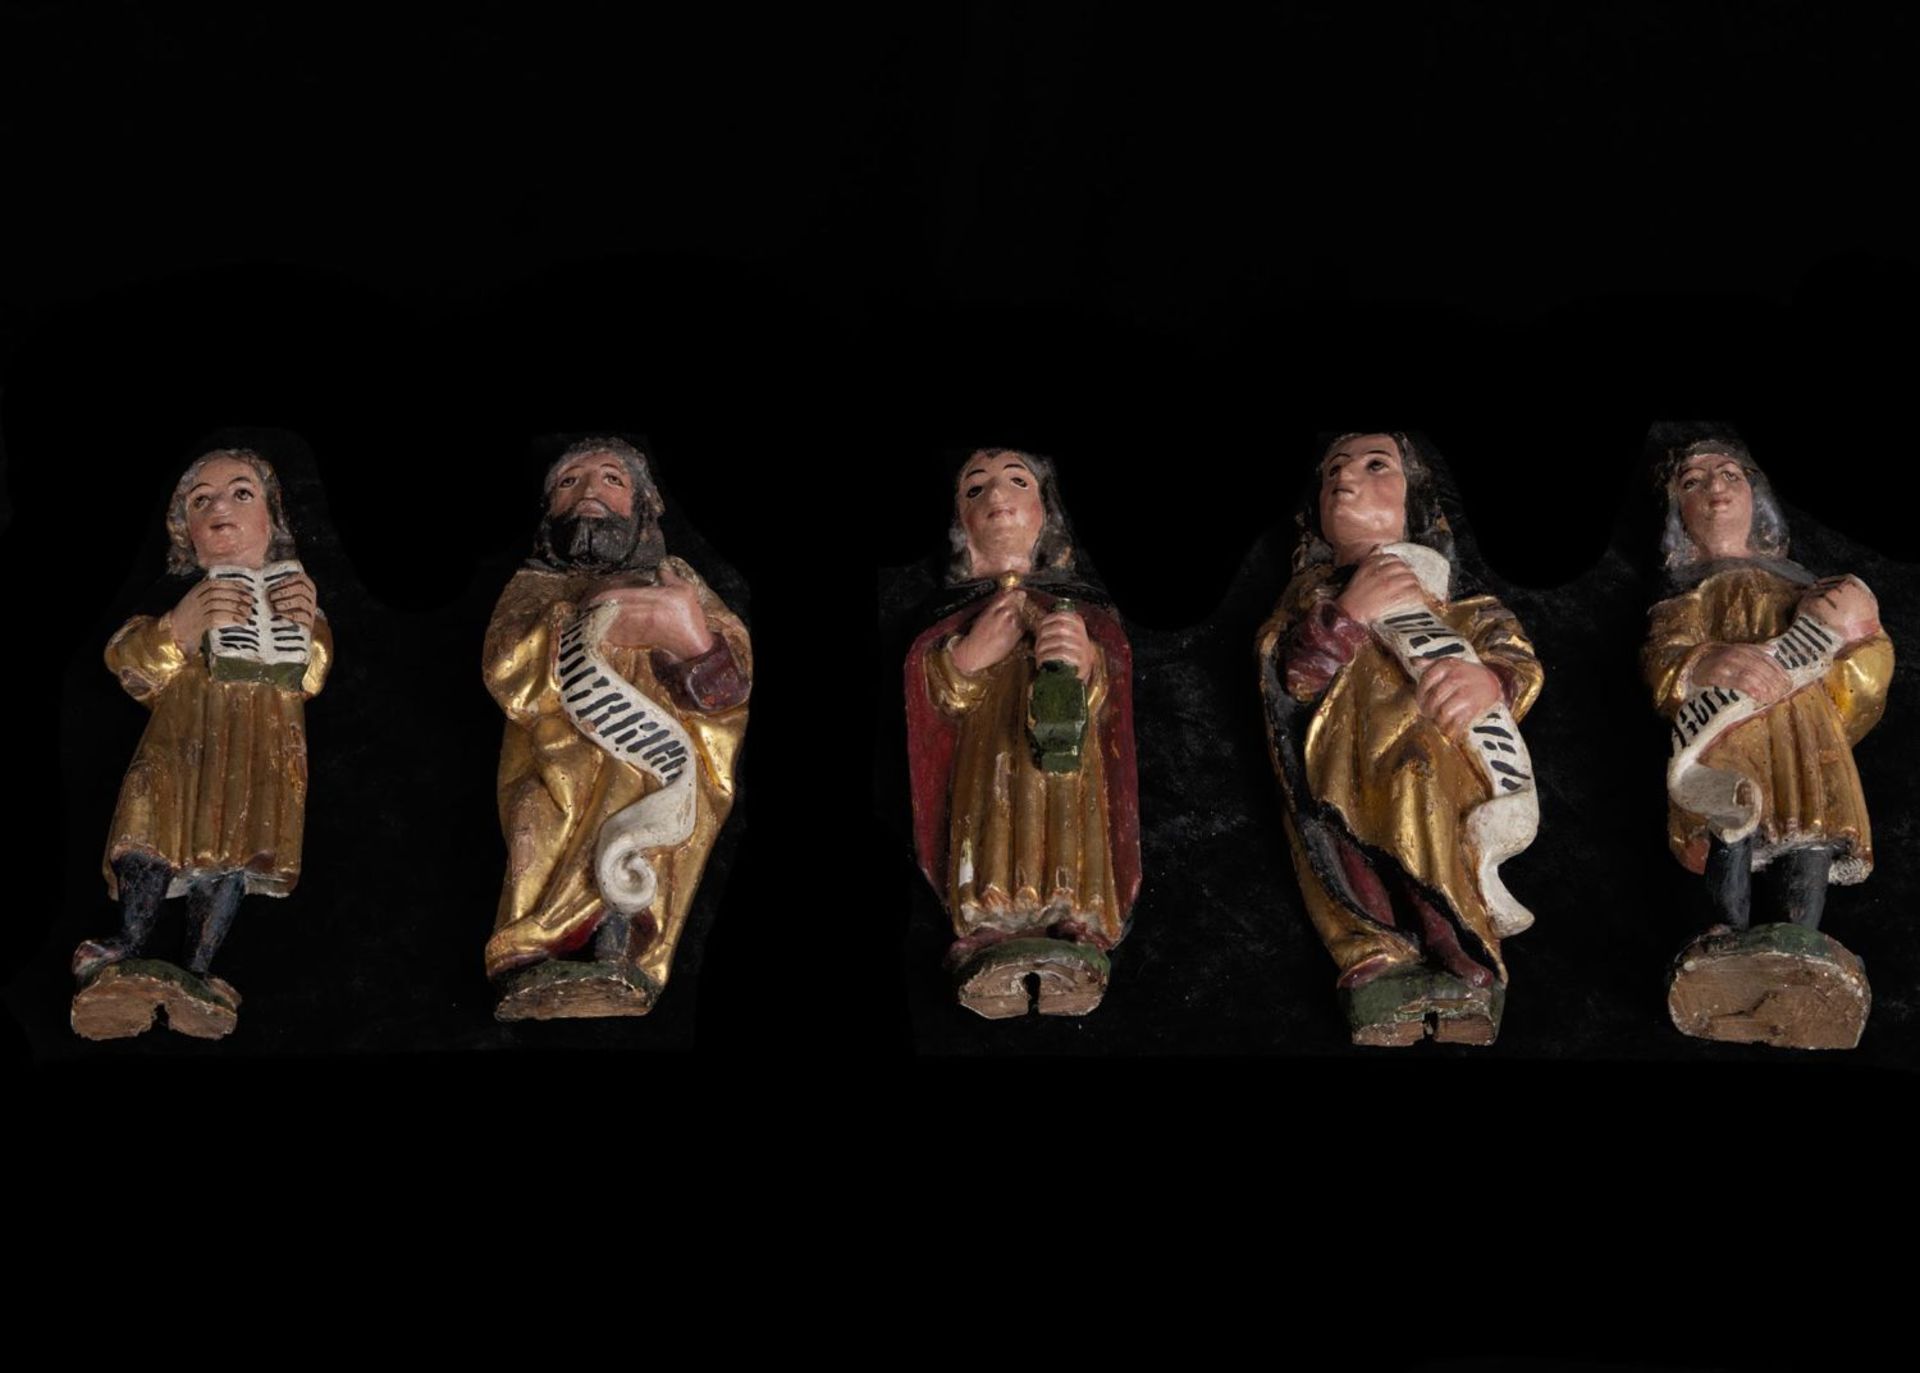 Mexican colonial set formed by 5 Apostles carvings, in carved and gilded tropical wood, 17th century